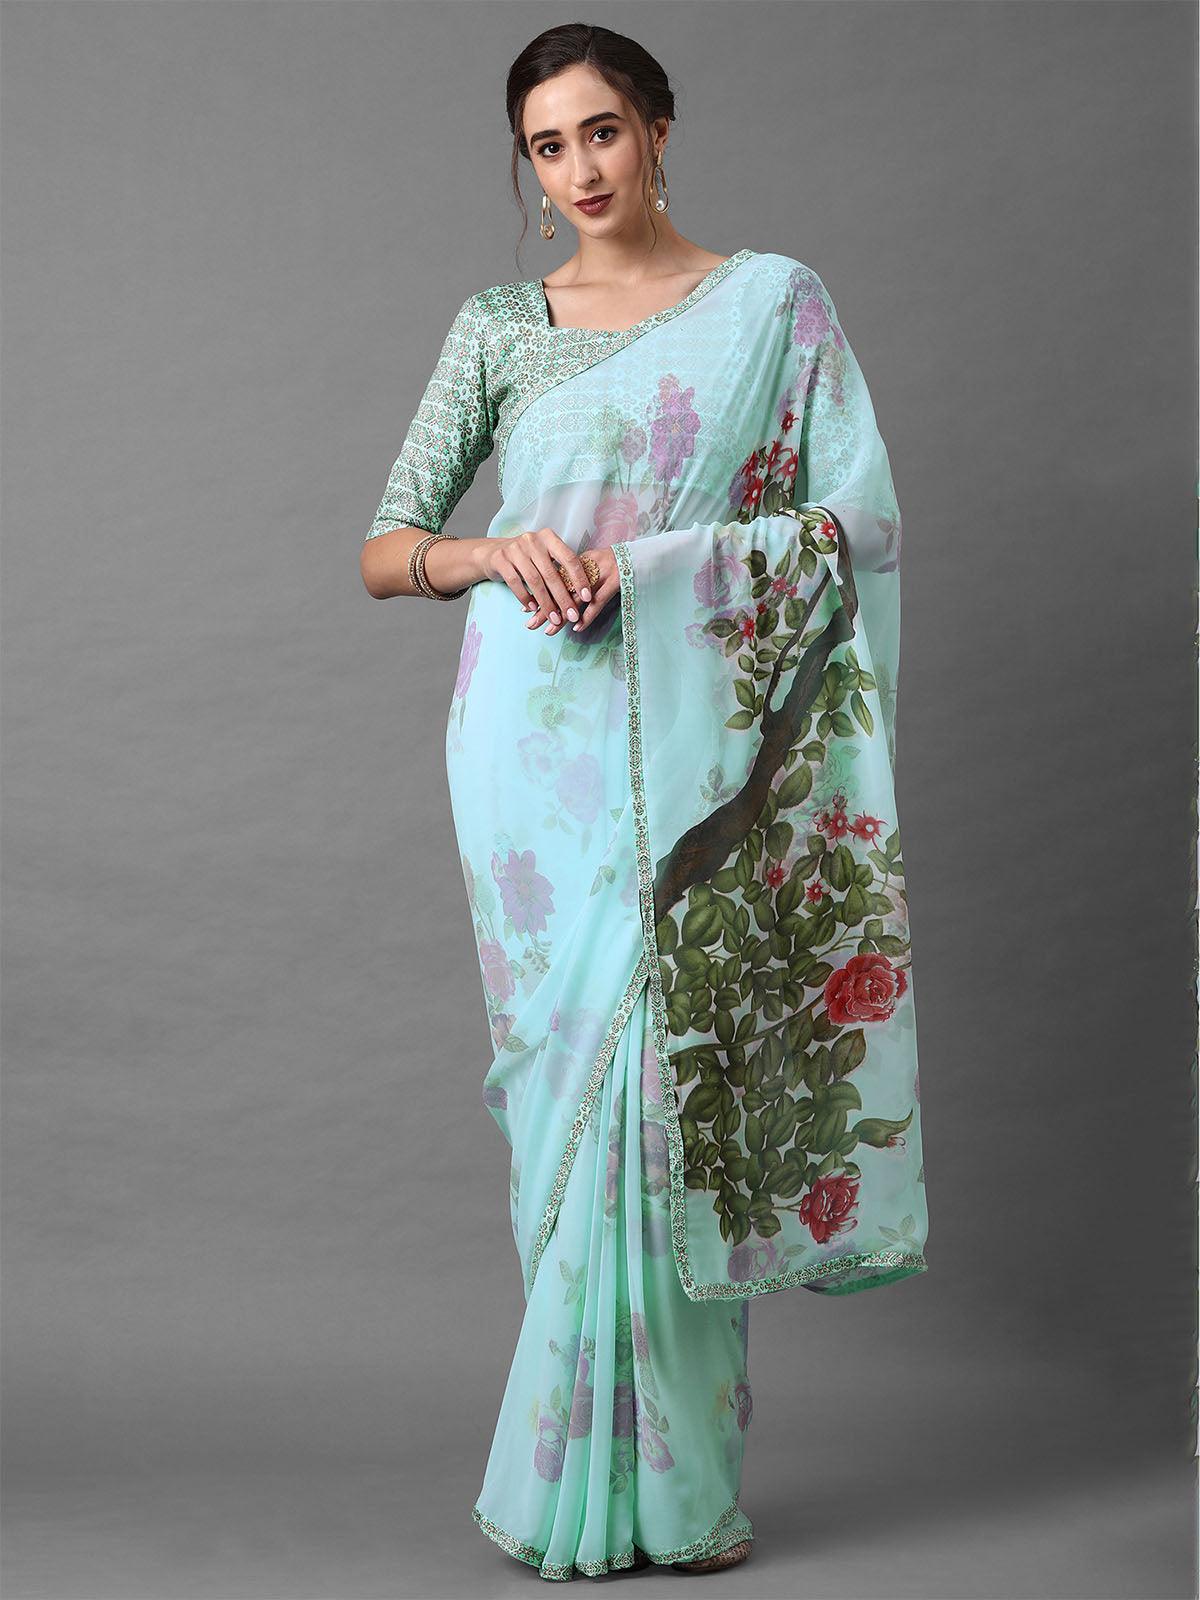 Women's Sky Blue Festive Georgette Printed Saree With Unstitched Blouse - Odette